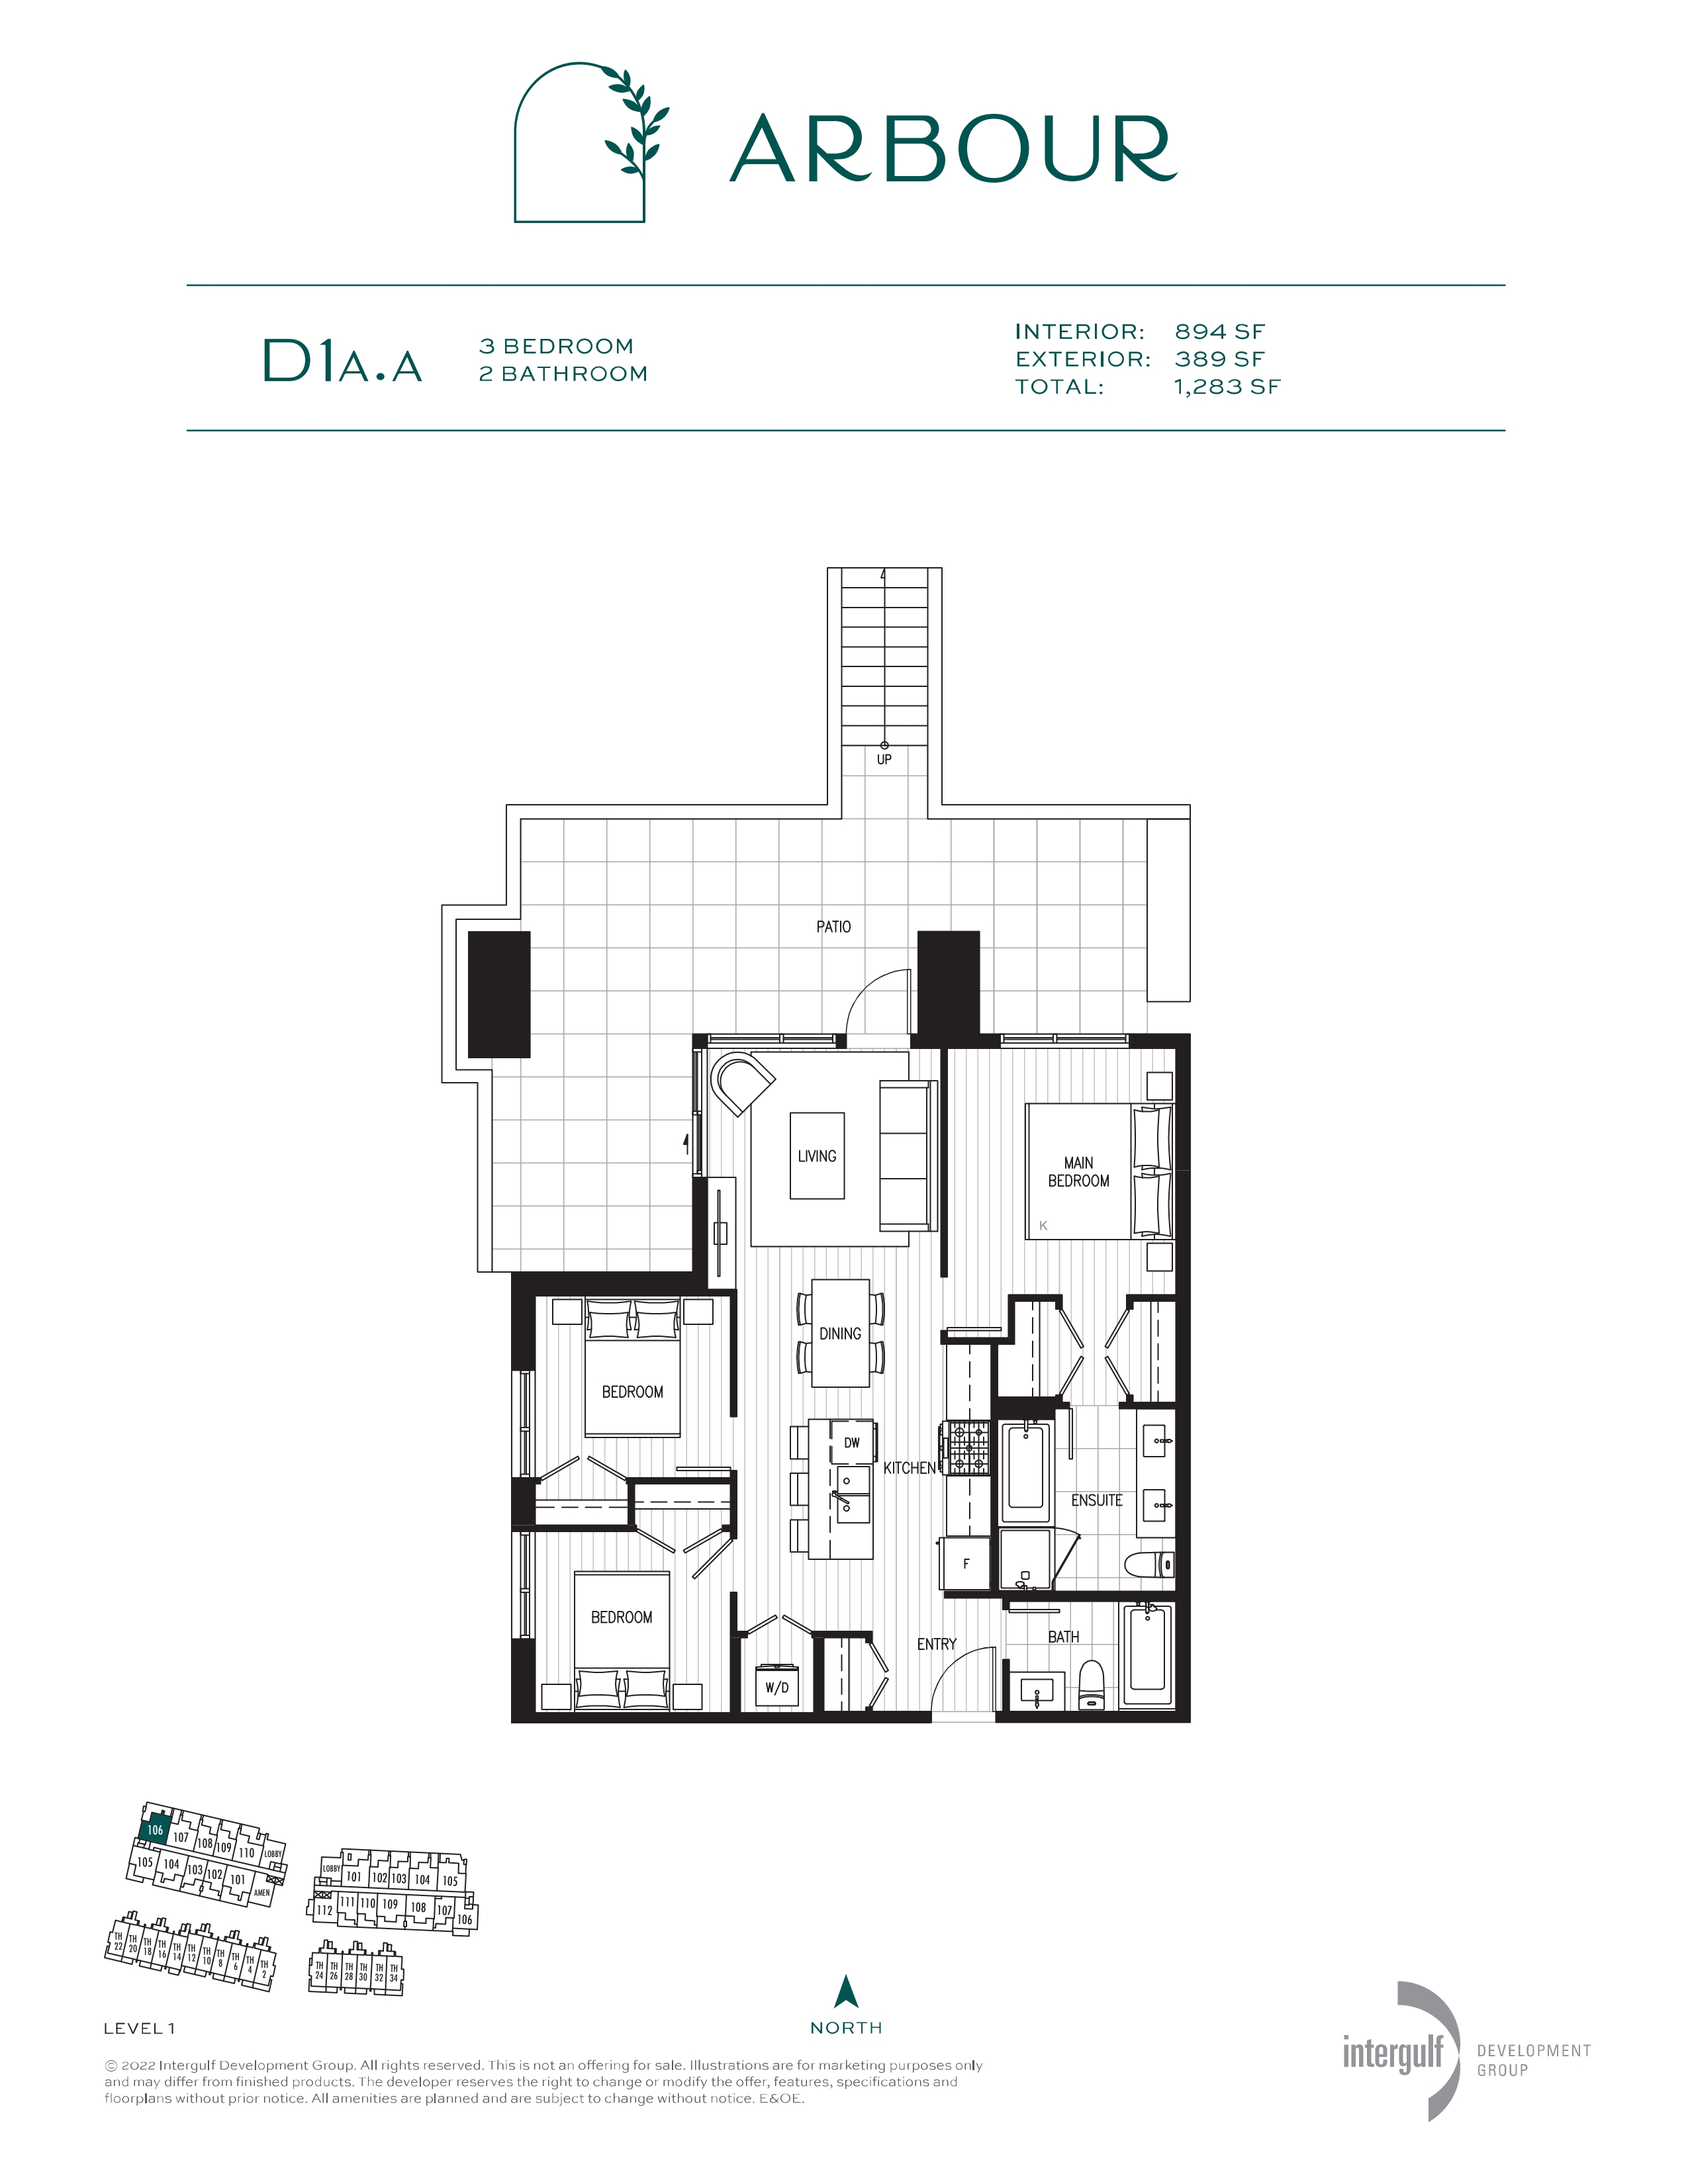  D1A.A  Floor Plan of Arbour Condos with undefined beds